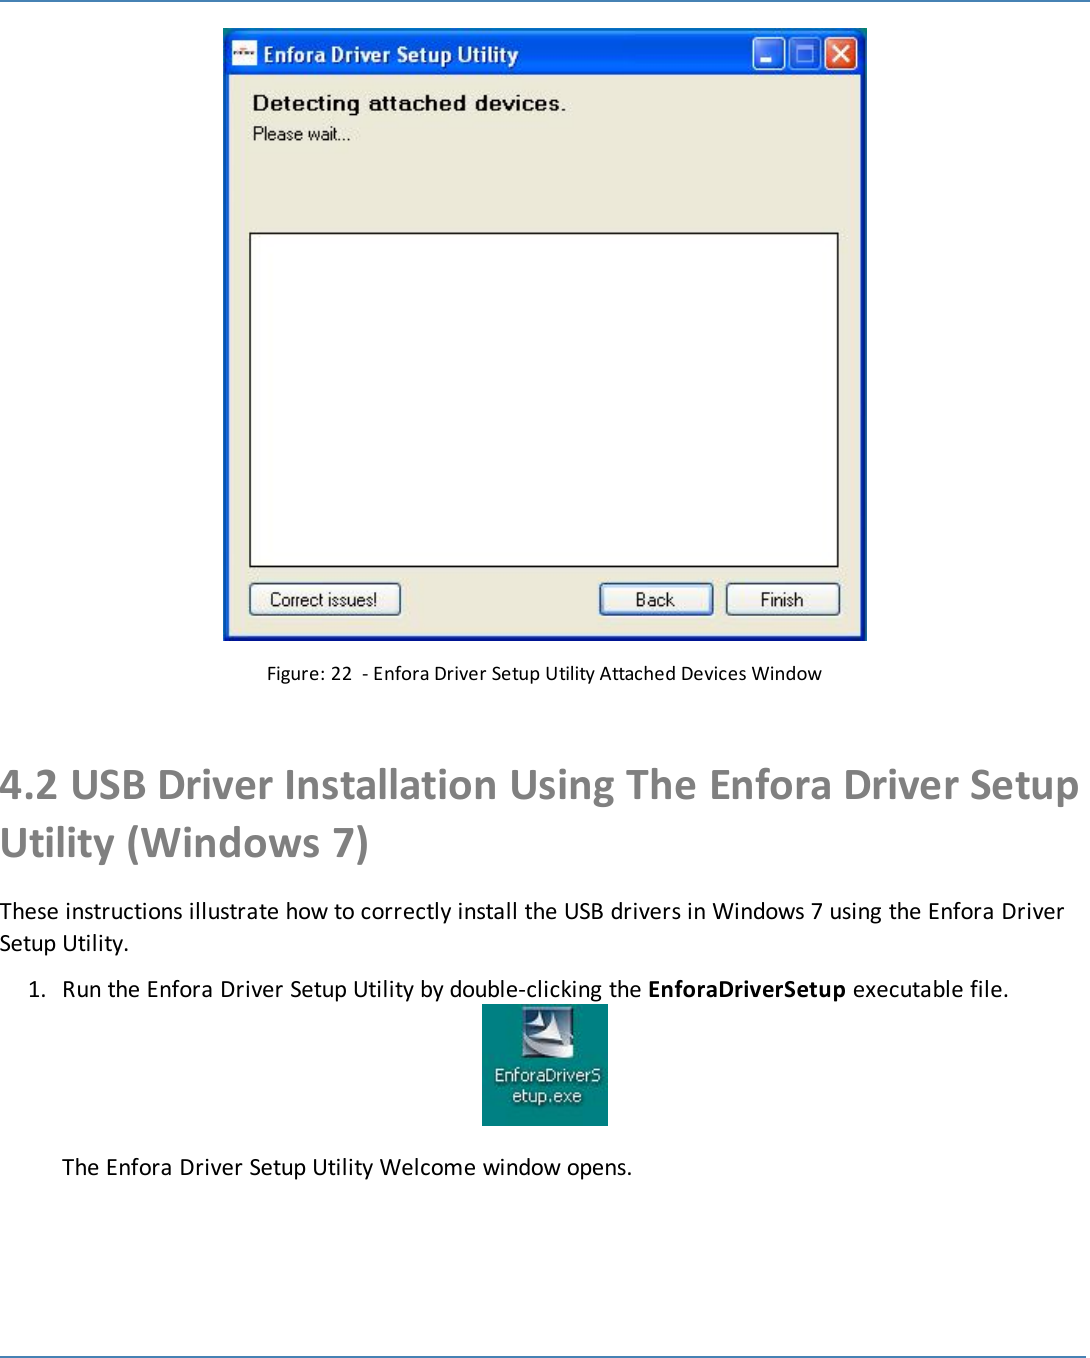 27Figure: 22 - Enfora Driver Setup Utility Attached Devices Window4.2 USB Driver Installation Using The Enfora Driver SetupUtility (Windows 7)These instructions illustrate how to correctly install the USB drivers in Windows 7 using the Enfora DriverSetup Utility.1. Run the Enfora Driver Setup Utility by double-clicking the EnforaDriverSetup executable file.The Enfora Driver Setup Utility Welcome window opens.